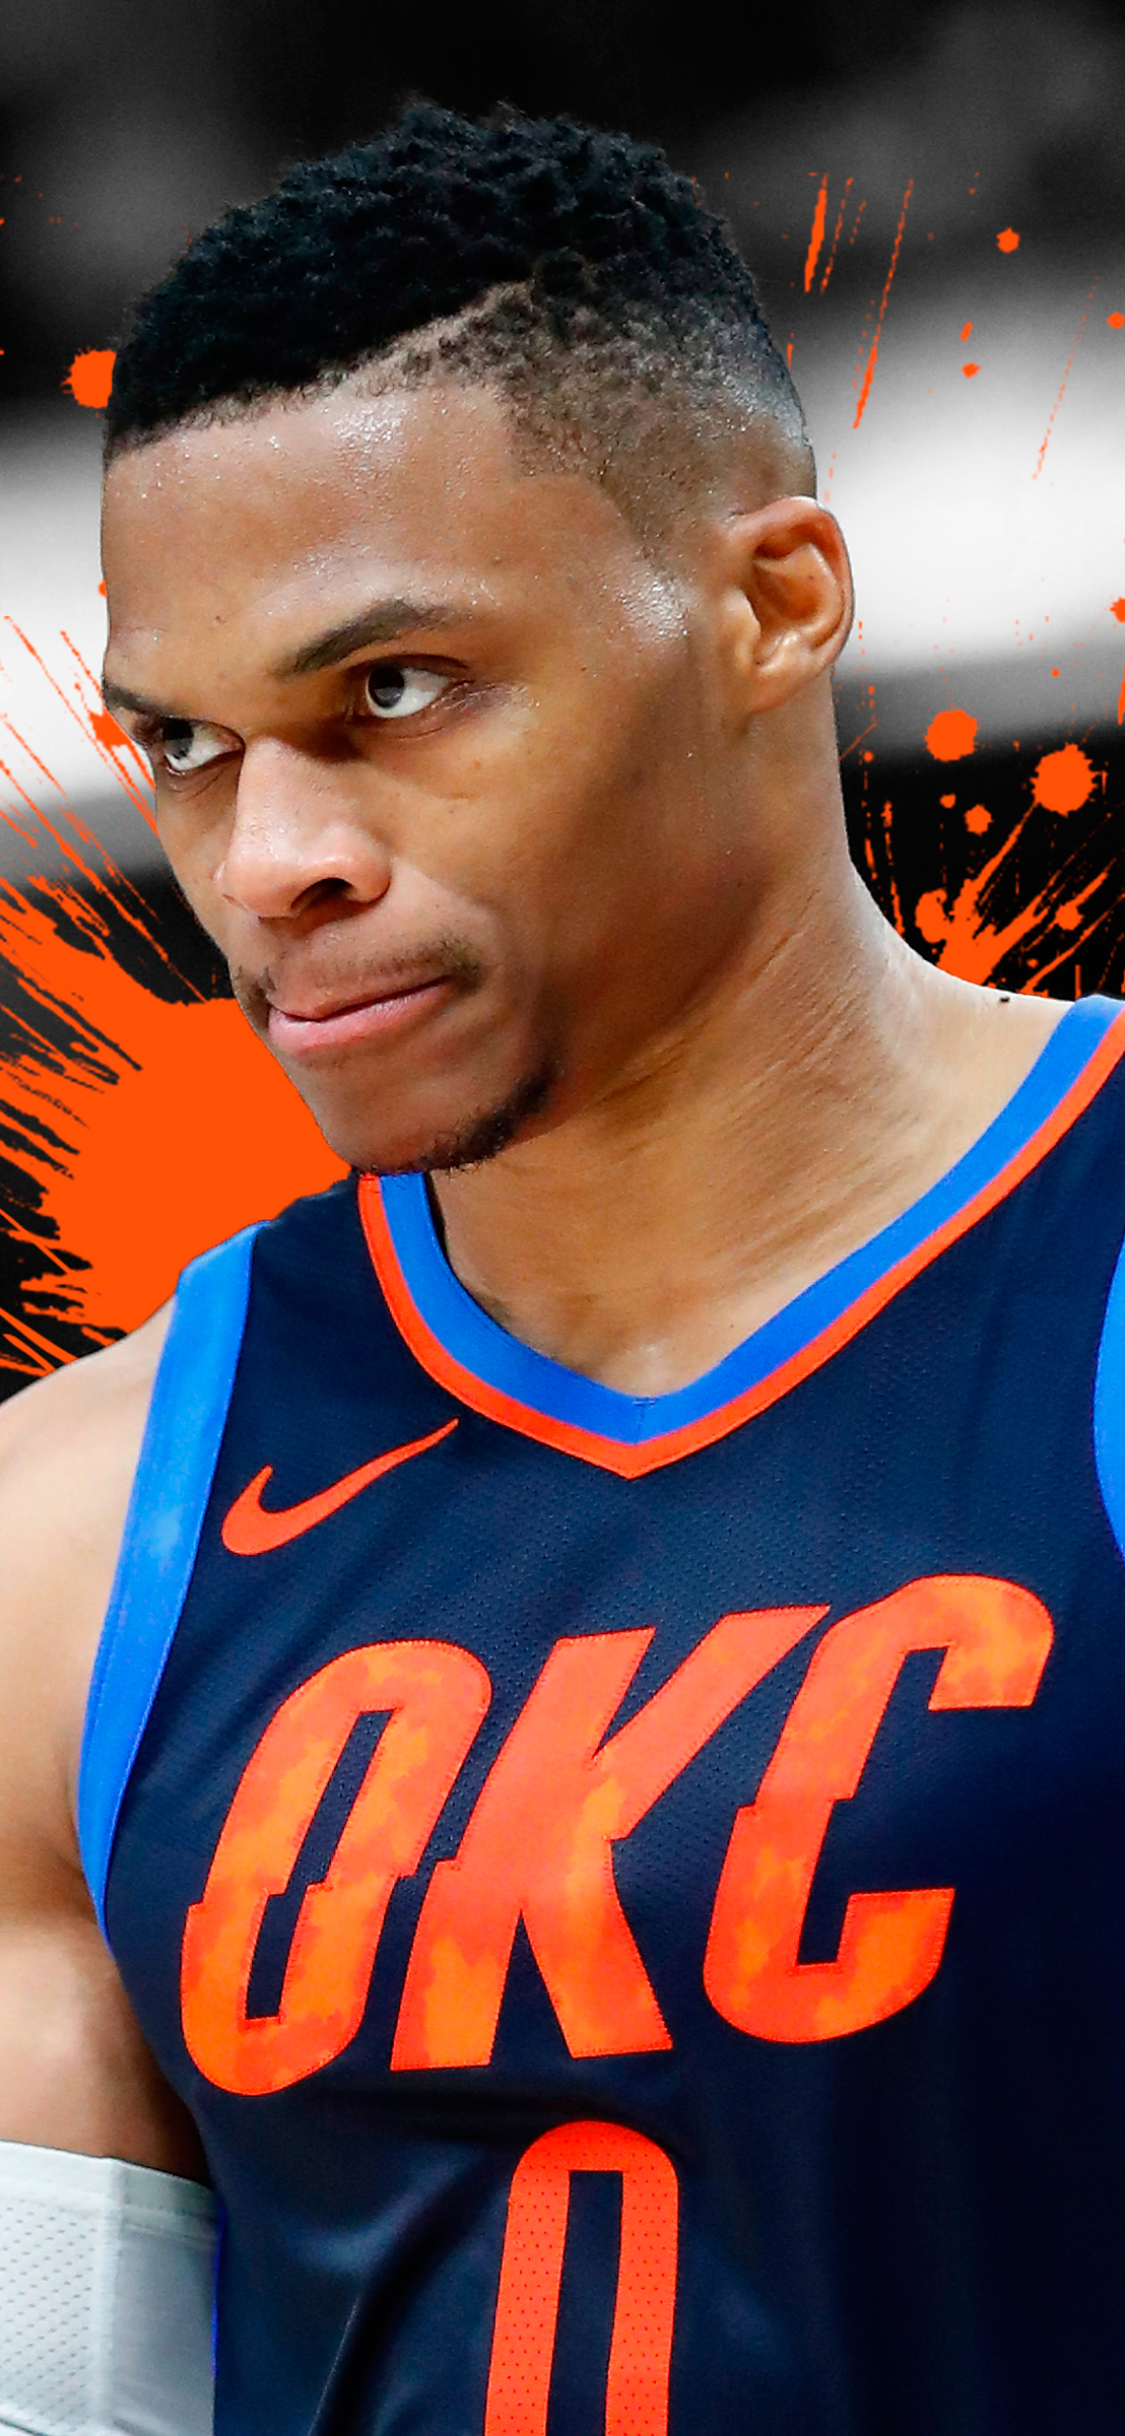 russell westbrook wallpaper,hair,hairstyle,basketball player,forehead,player